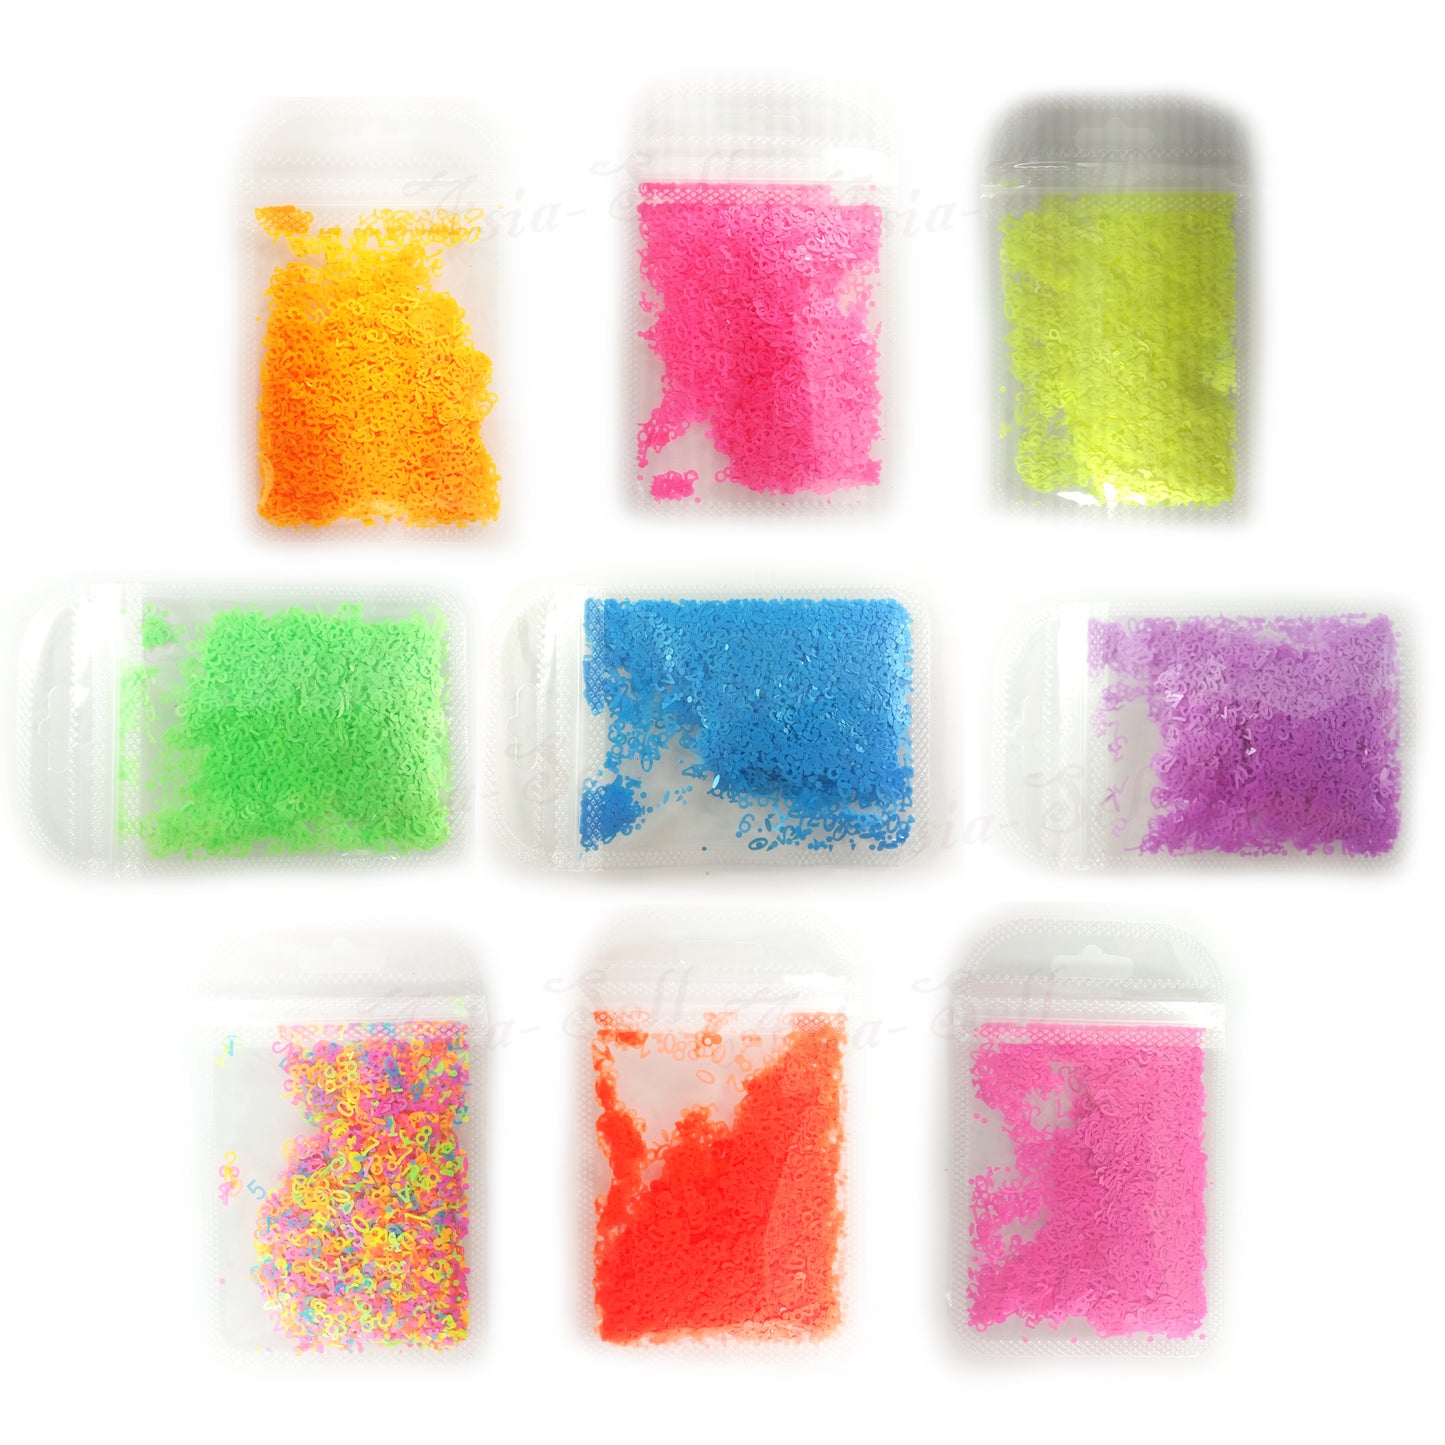 Flourescent Sequins Glitter Nail Art Mixed Size Number Design Shape Flakes Tips Manicure 3D Nail Accessories Main Image